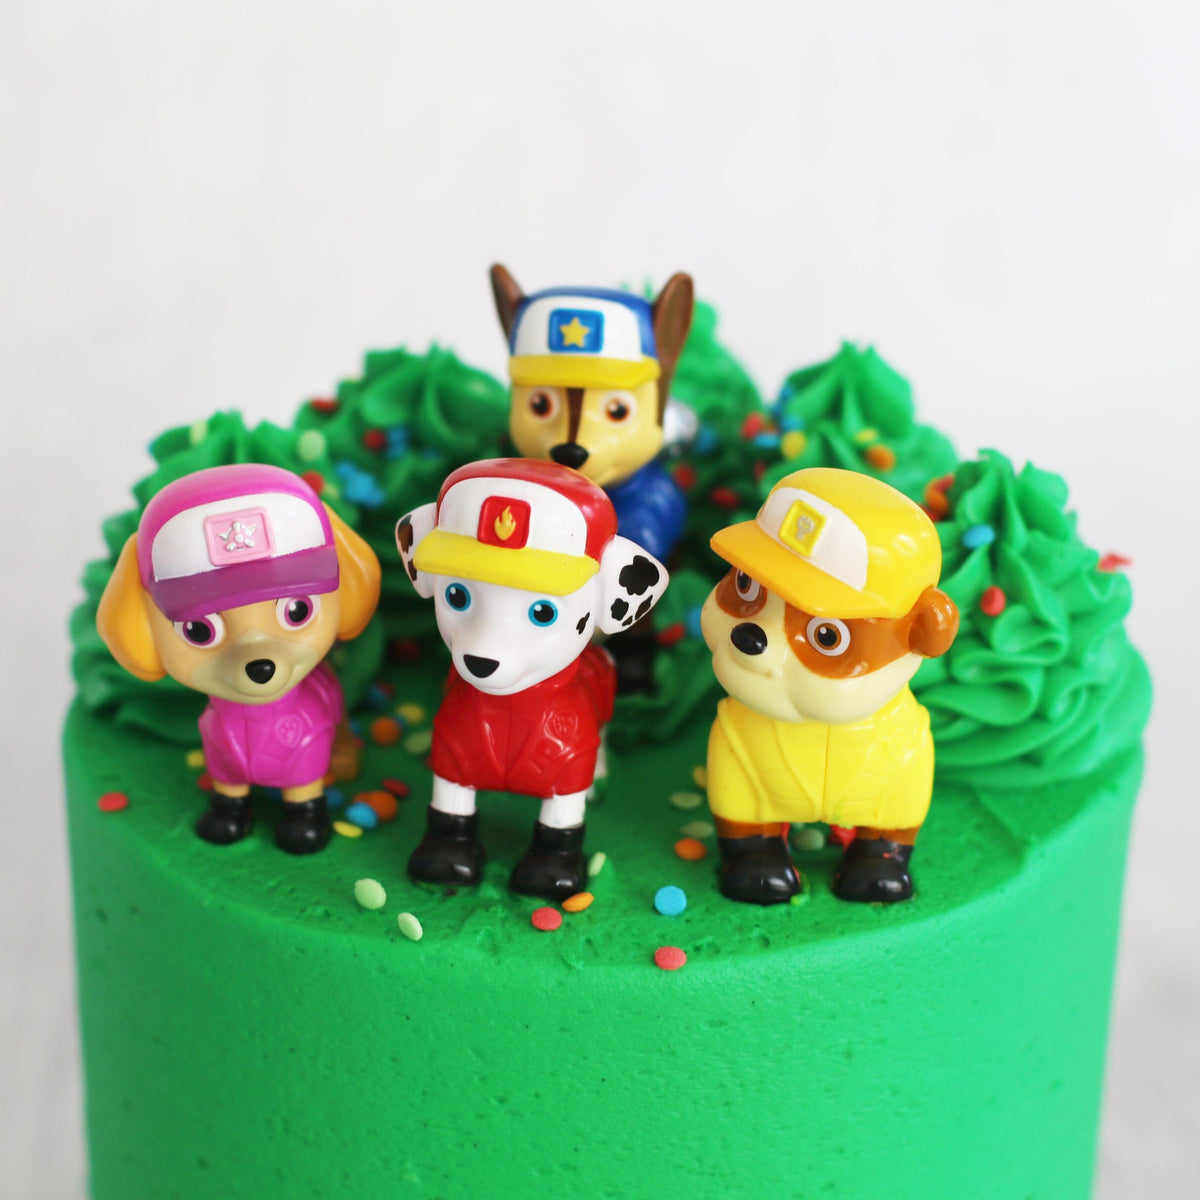 Paw Patrol Cake The Cupcake Queens 